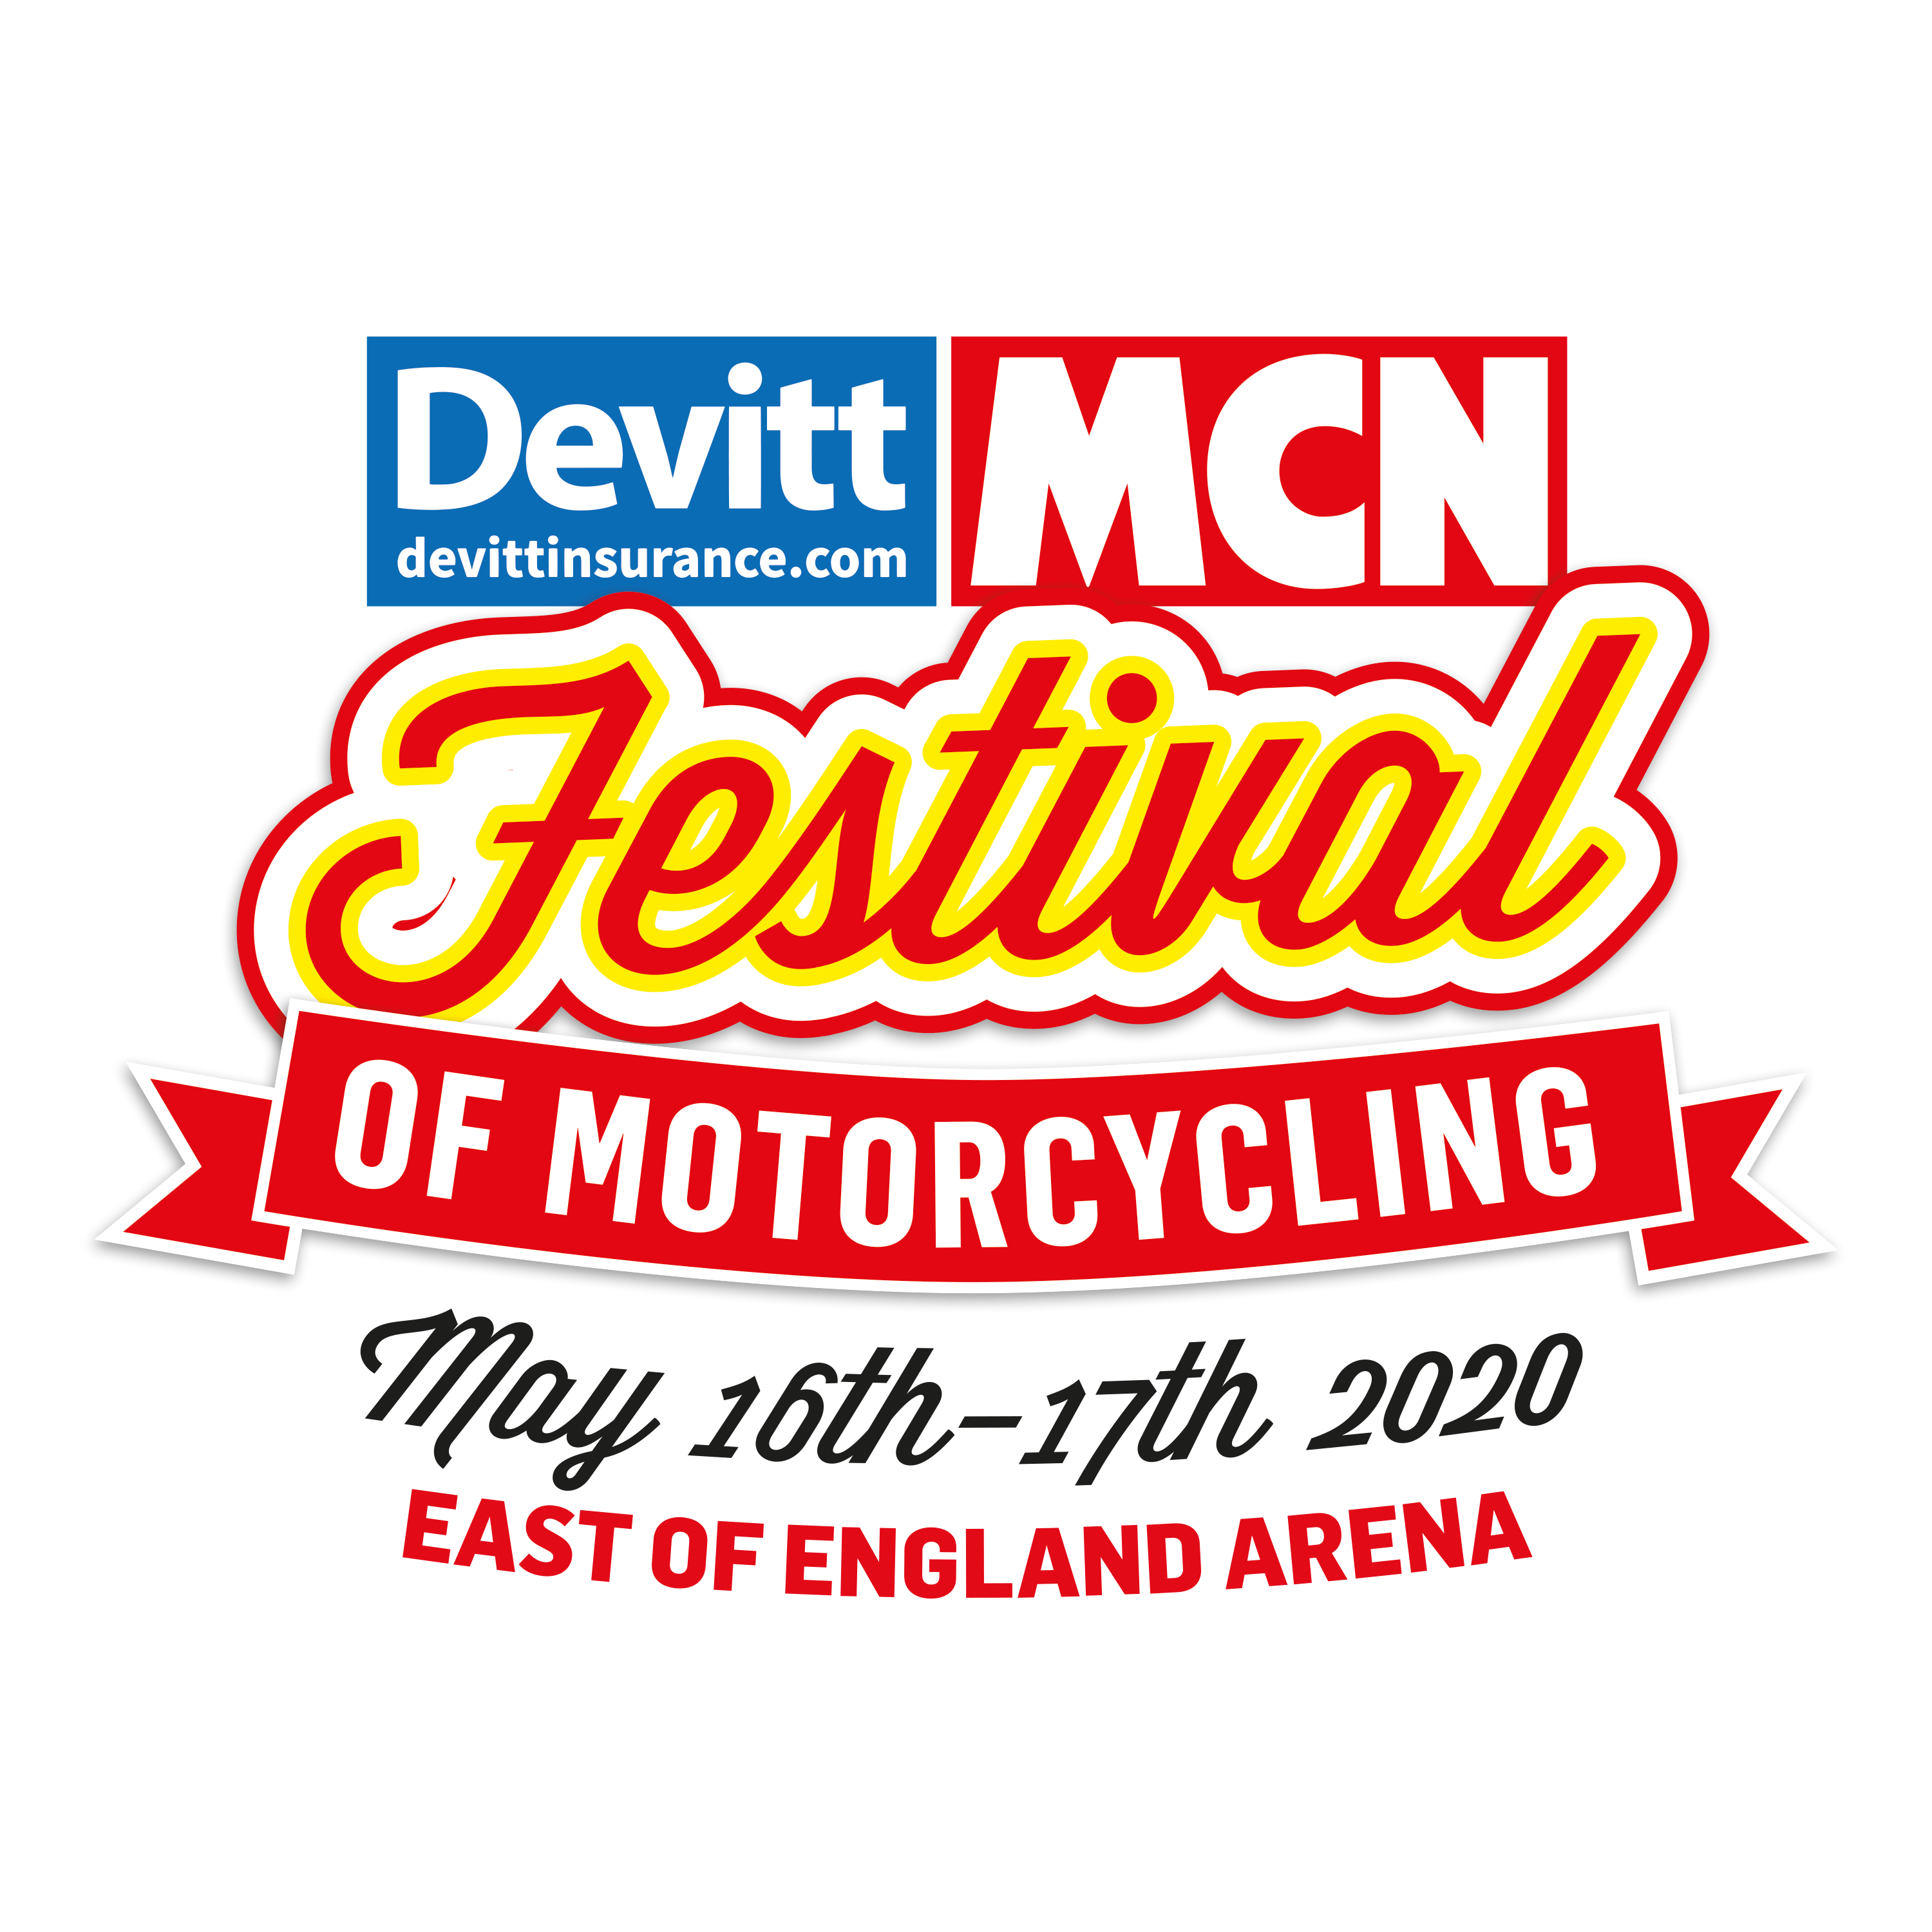 MCN Festival of motorcycling. Invitation to ALL DOC GB members.